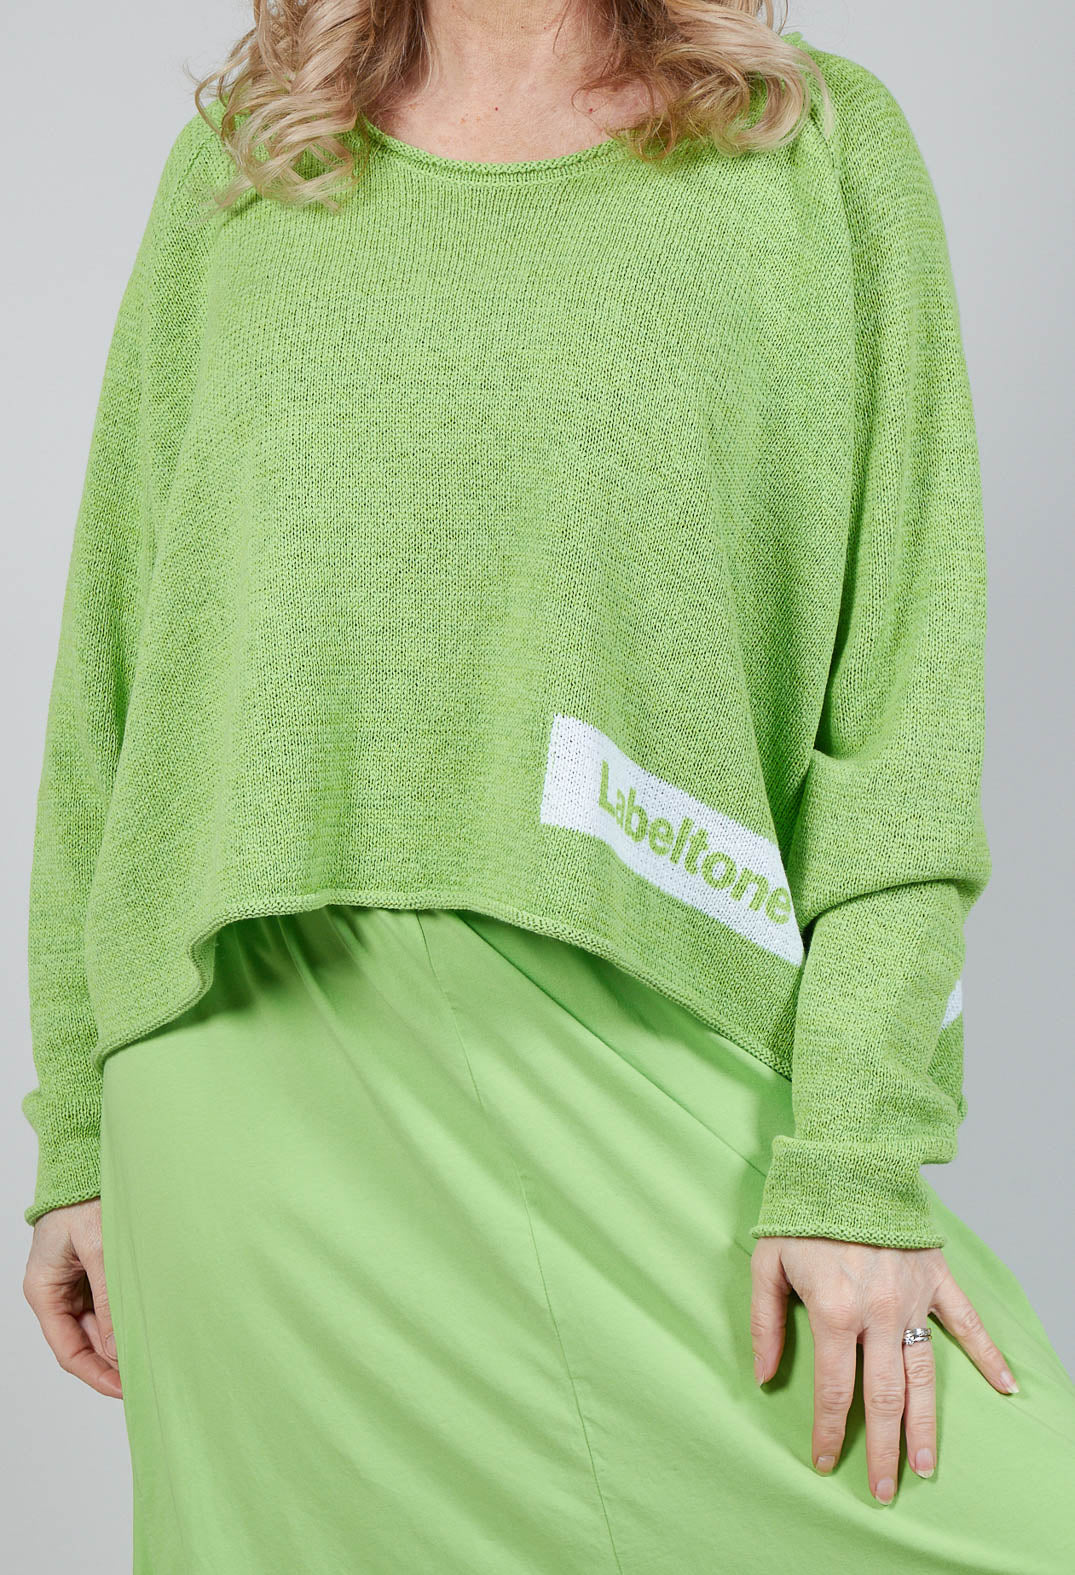 Slouch Fit Jumper in Lime Print